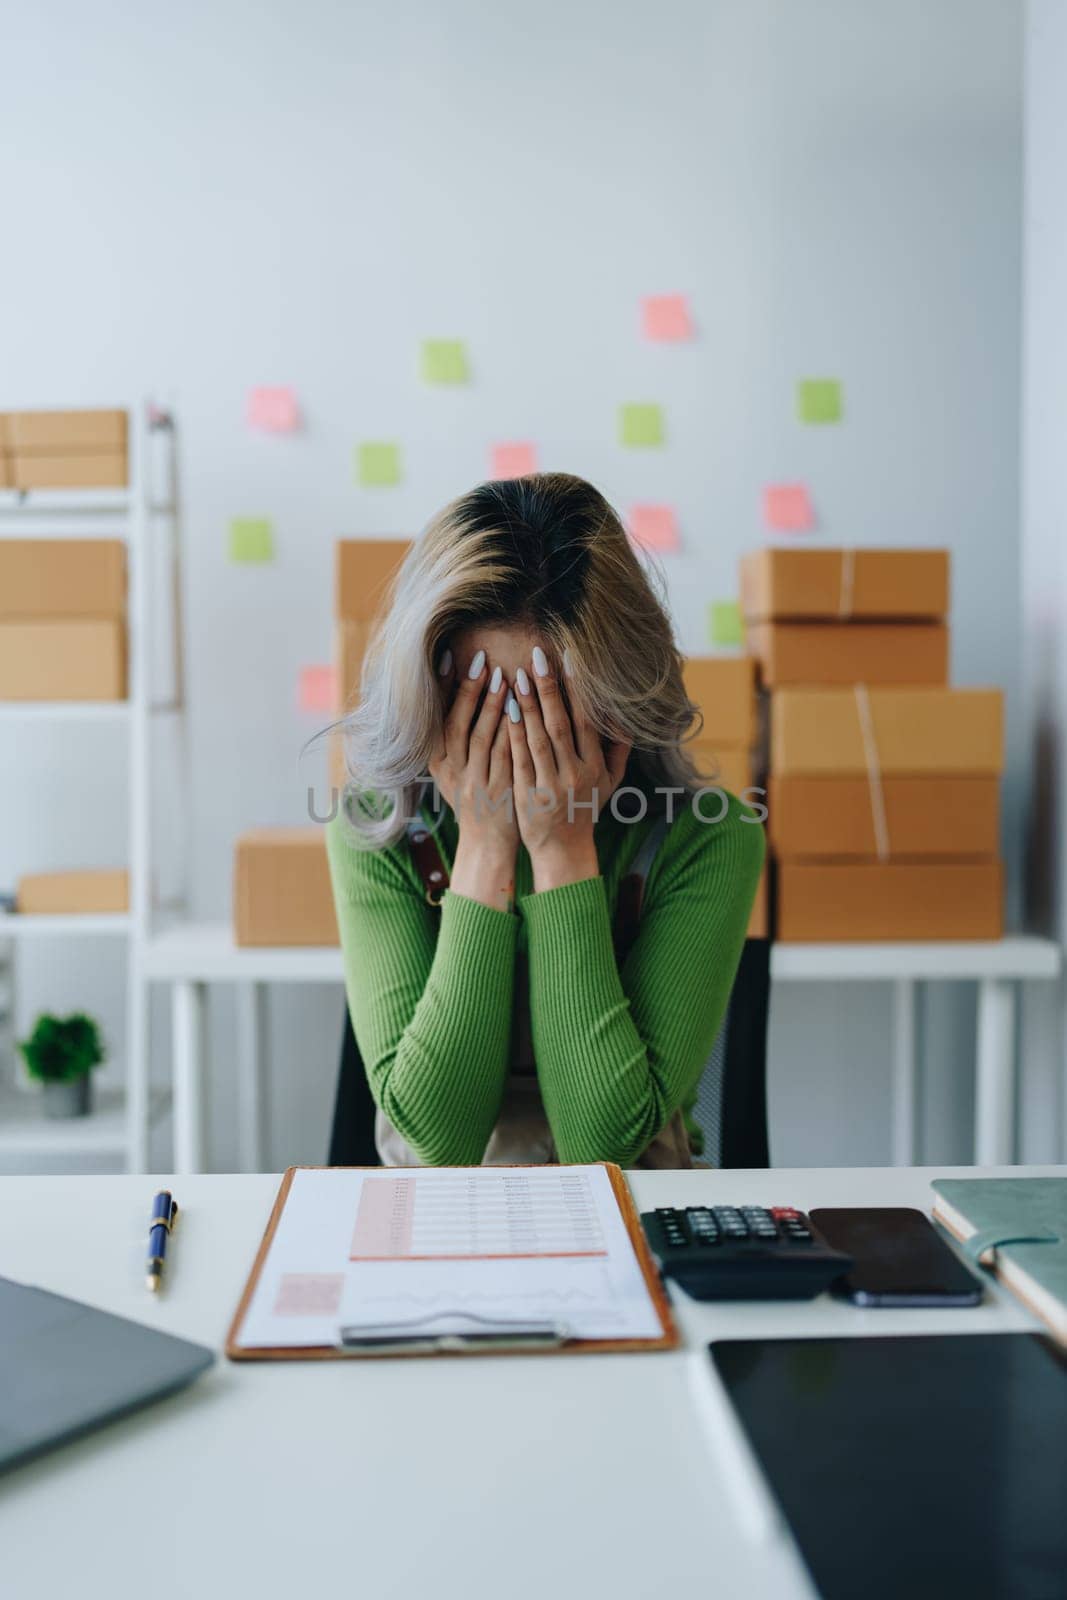 Starting small business entrepreneur of independent Asian woman showing her face worried about the sales of her business not reaching the target set. SME concepts by Manastrong